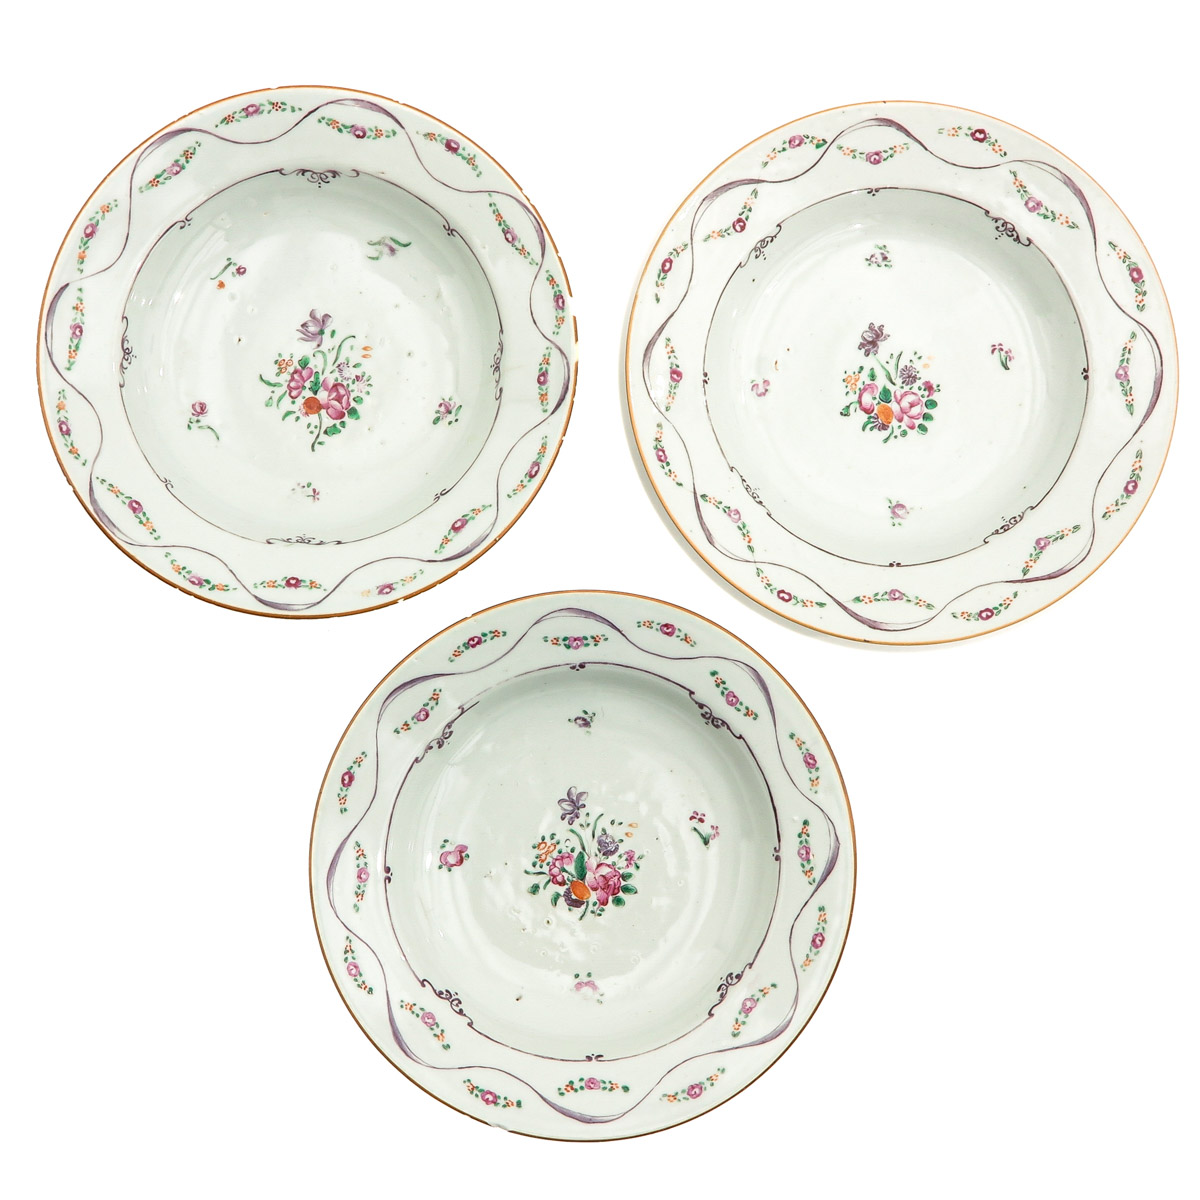 A Series of 10 Famille Rose Plates - Image 5 of 10